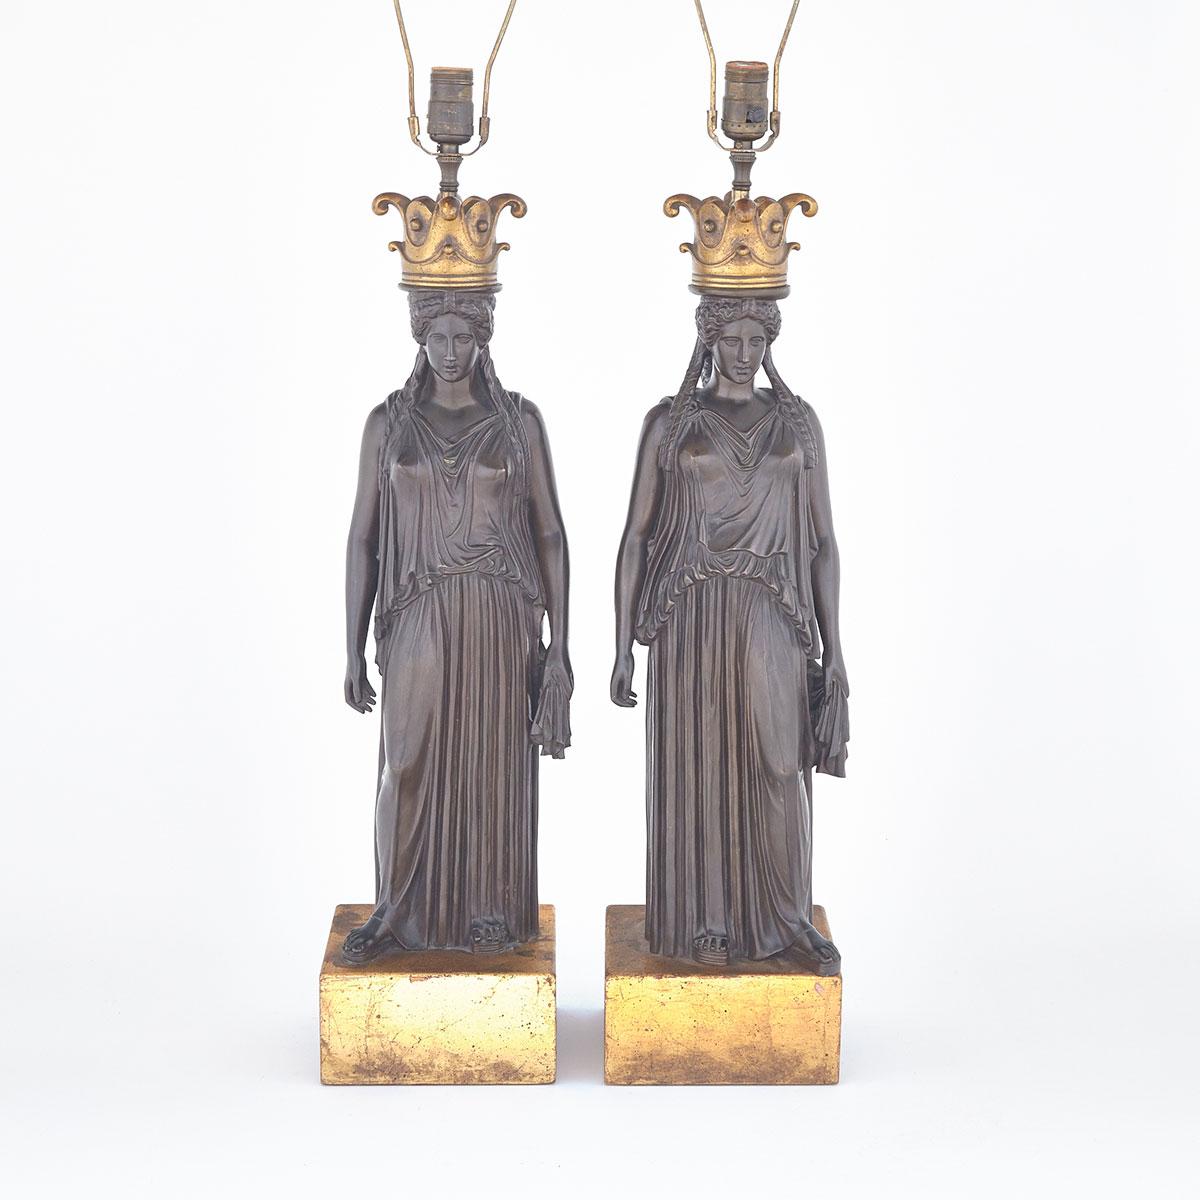 Pair of Gilt and Patinated Bronze Caryatid Form Figural Table Lamps, early 20th century